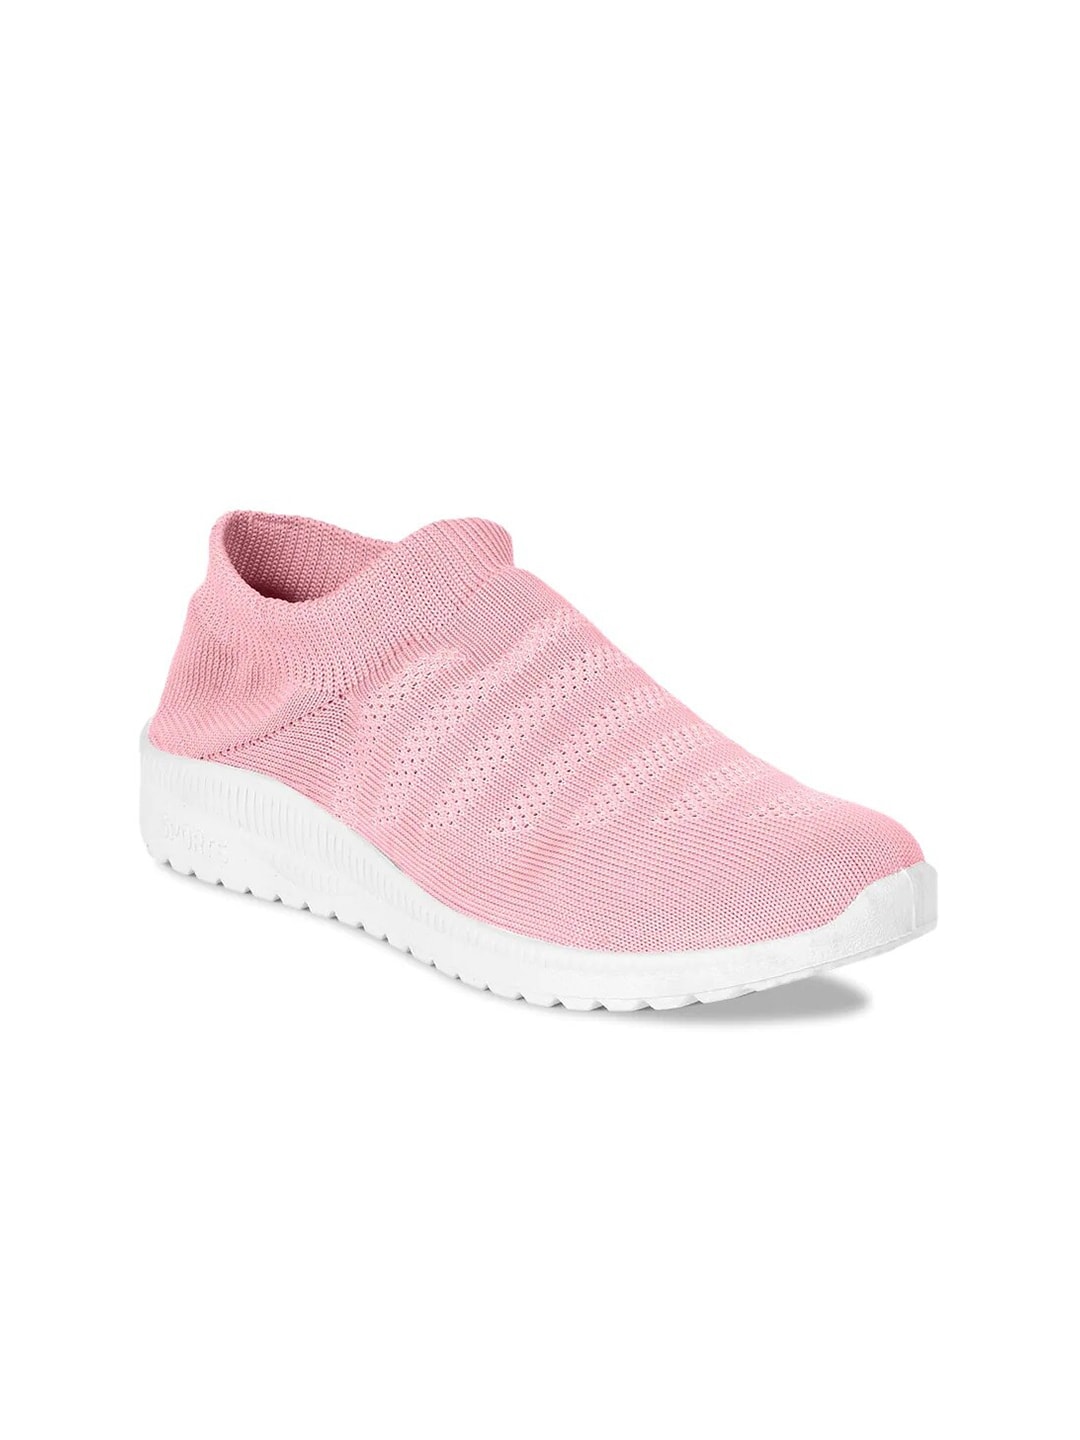 ZAPATOZ Women Pink Textile Walking Non-Marking Shoes Price in India